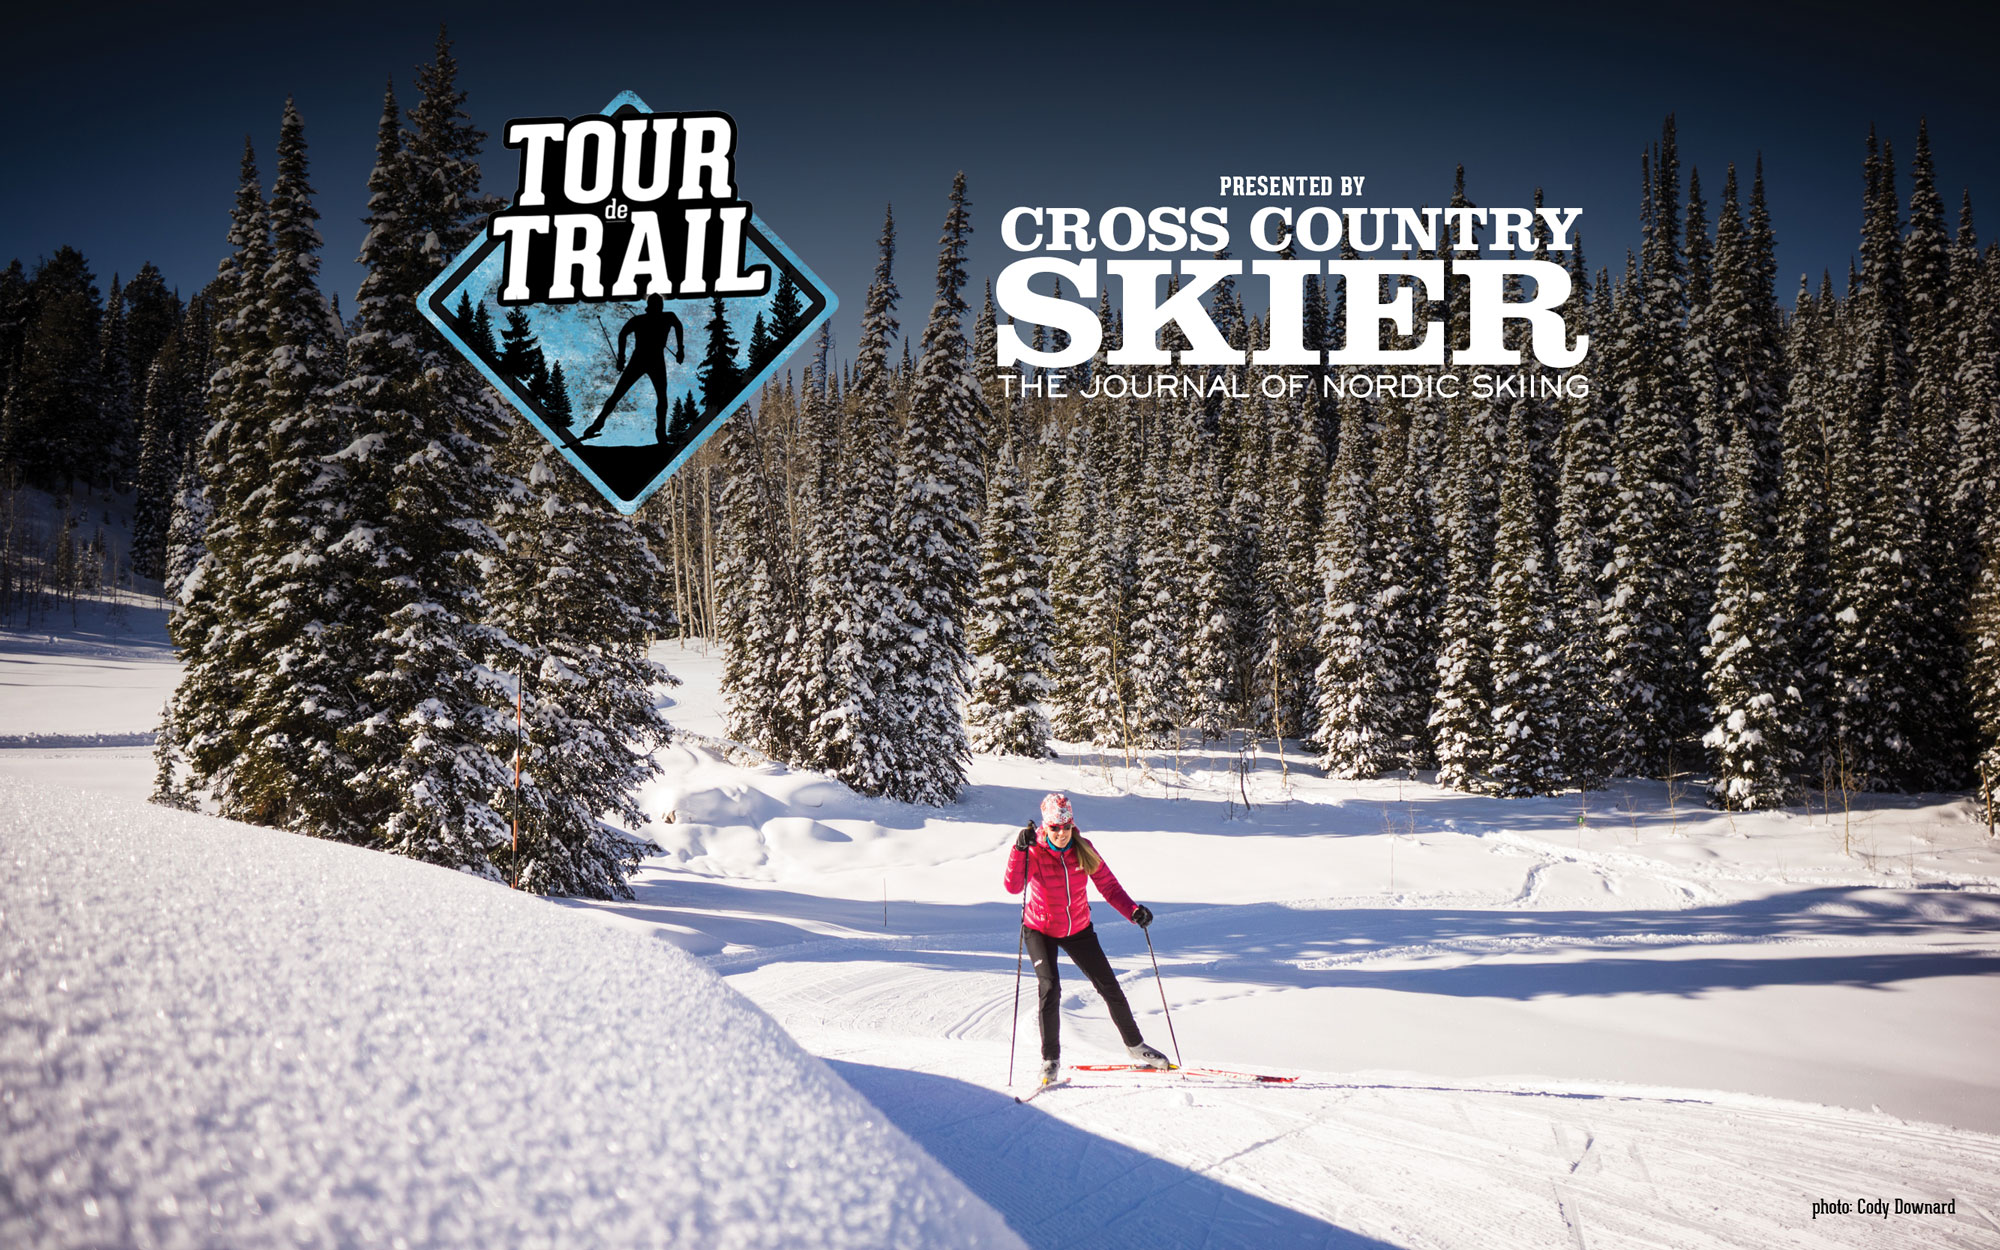 Cross Country Skier Tour de Trail Is On!